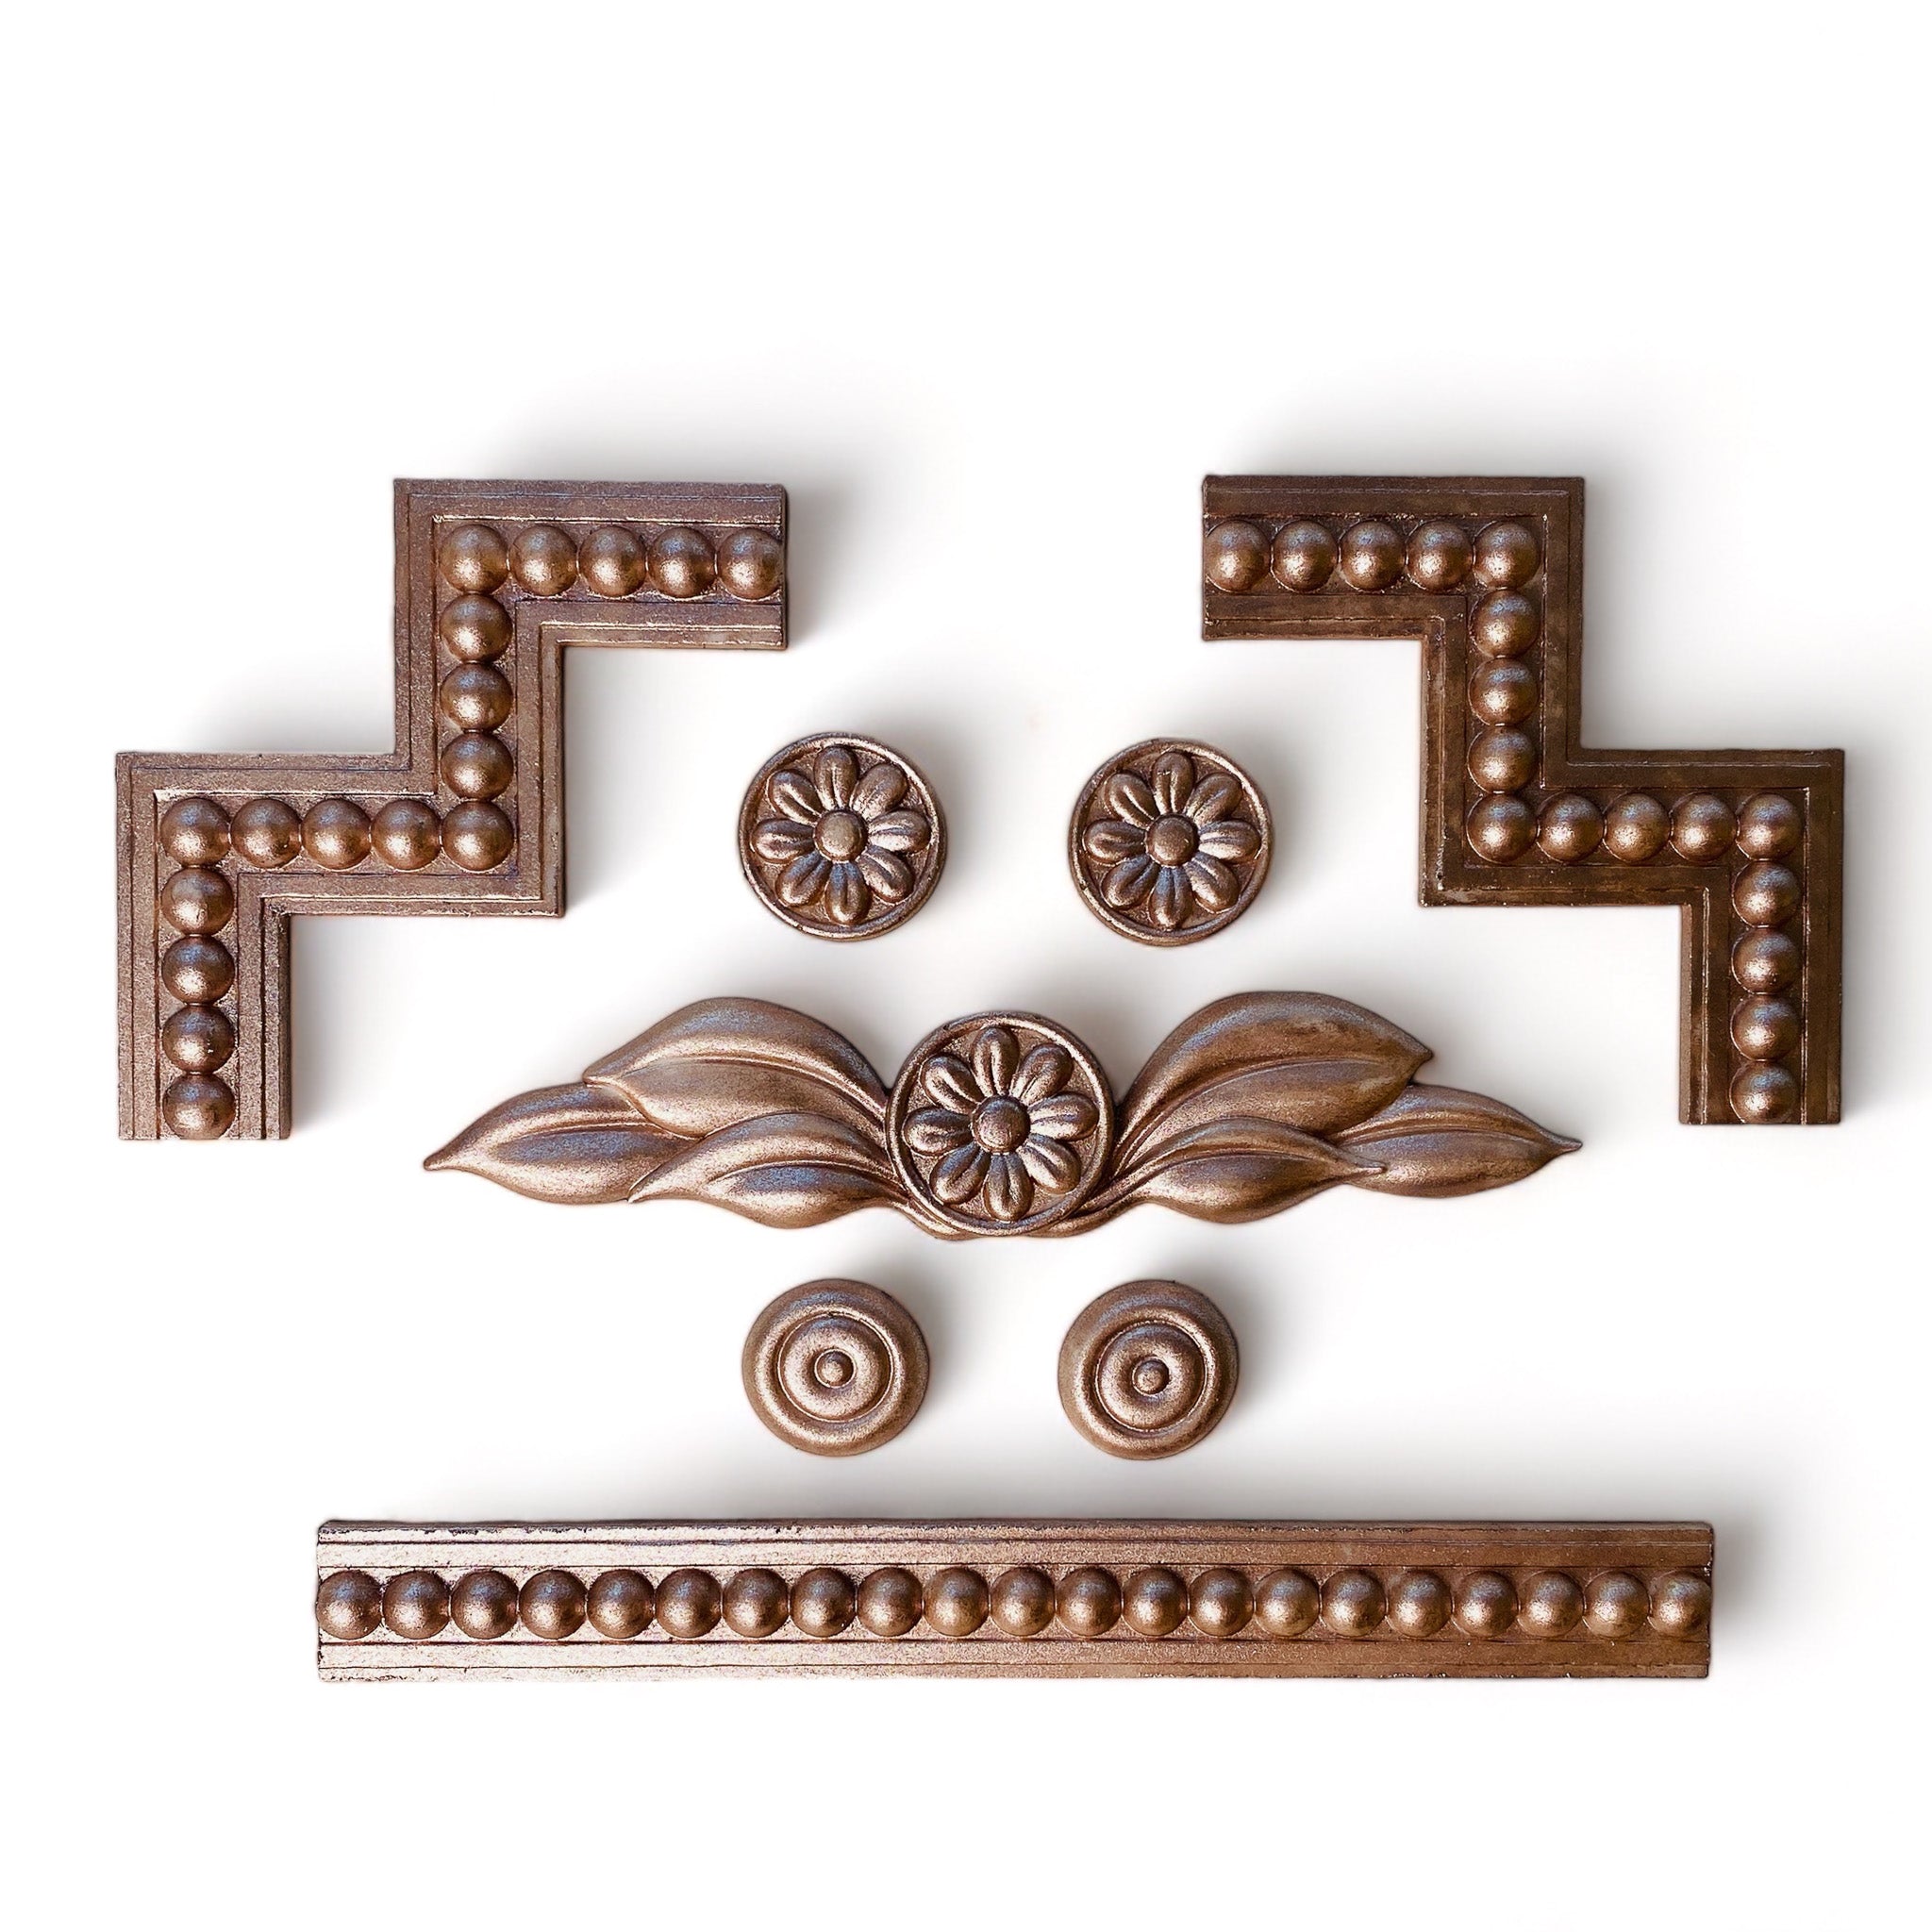 Copper colored silicone mold castings featuring unique edge pieces, borders, and multiple small floral medallions are against a white background.